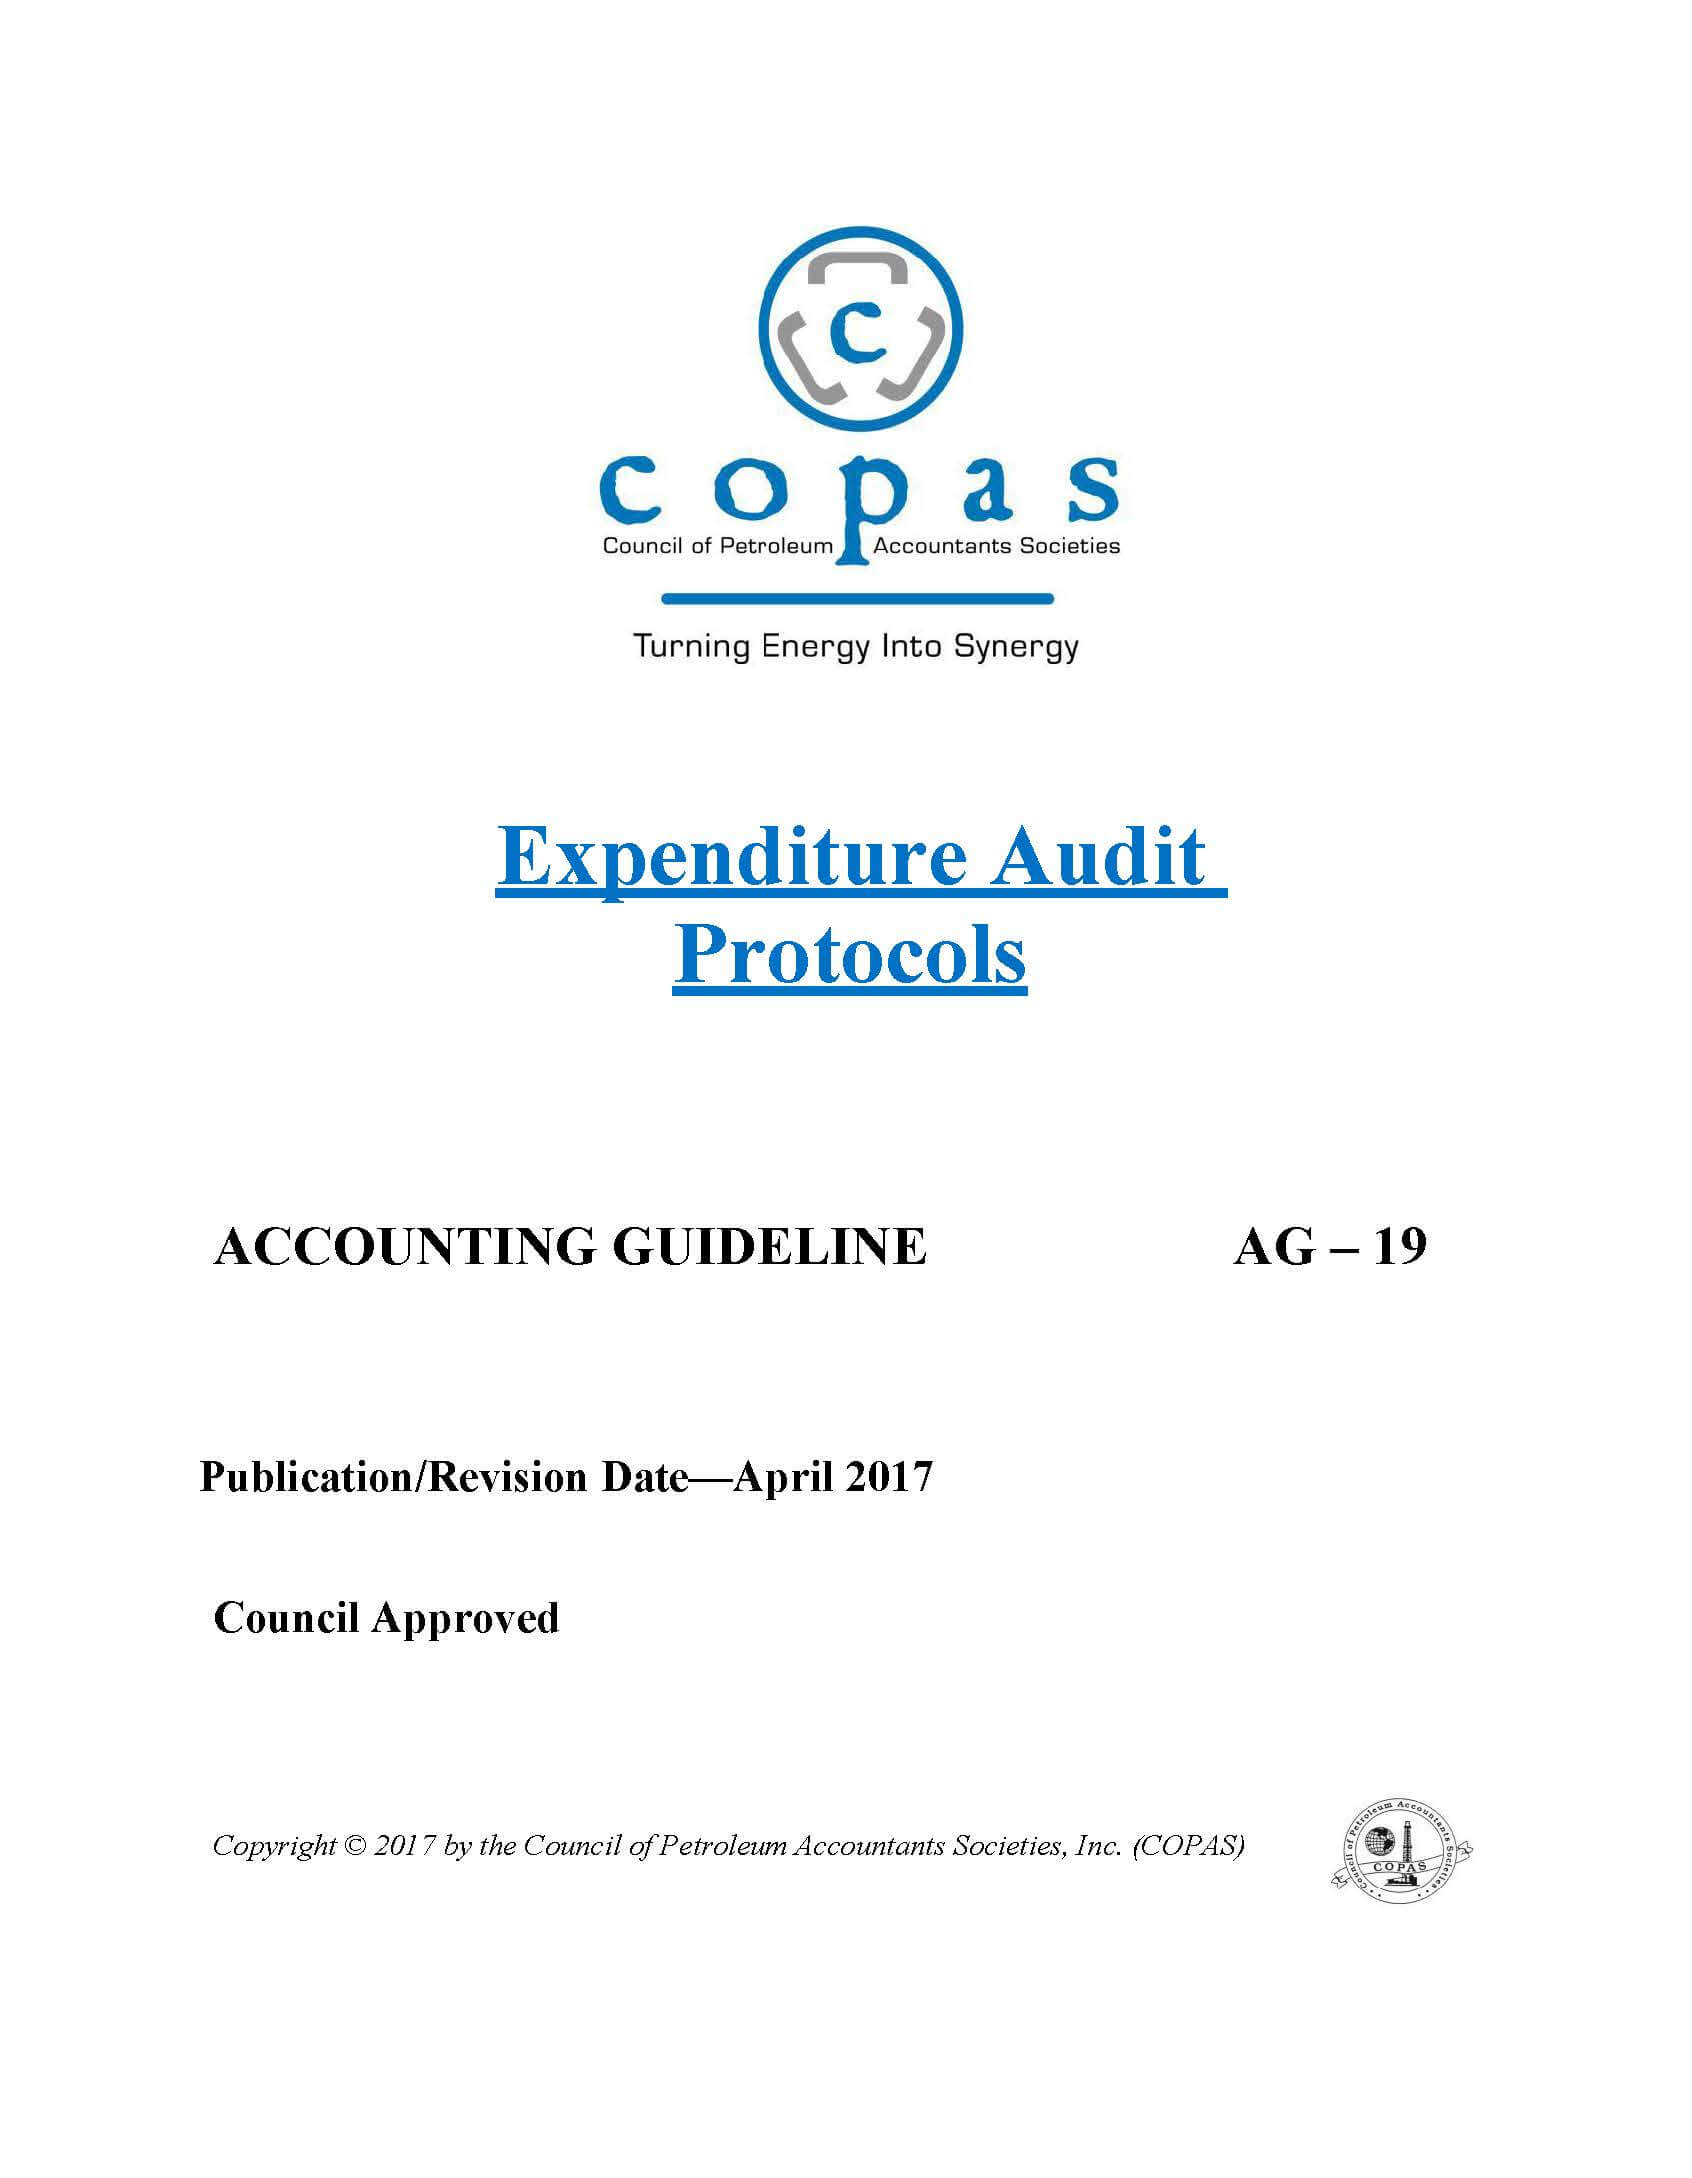 AG-19 Expenditure Audit Protocols - products AG 19 Expenditure Audit Protocols - Council of Petroleum Accountants Societies